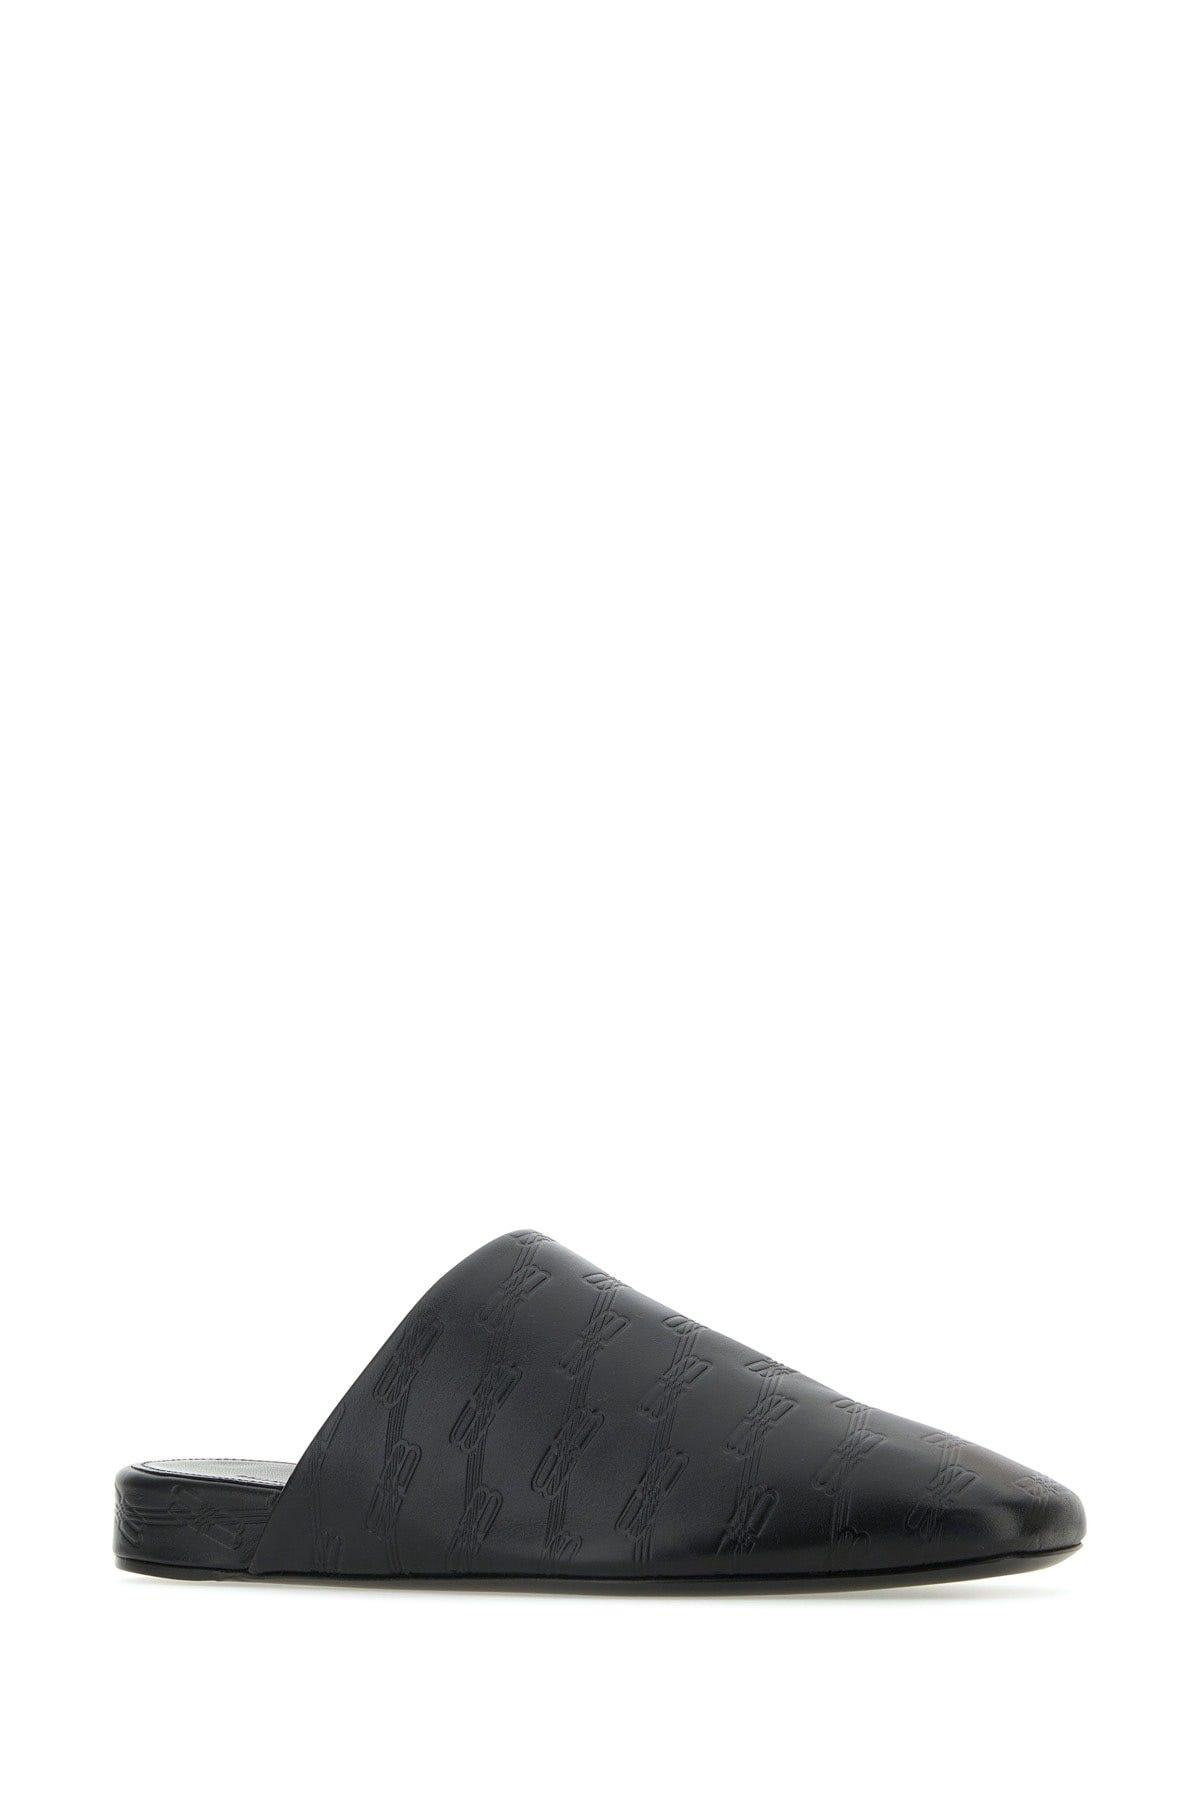 Balenciaga Black Leather Slippers for Men | Lyst